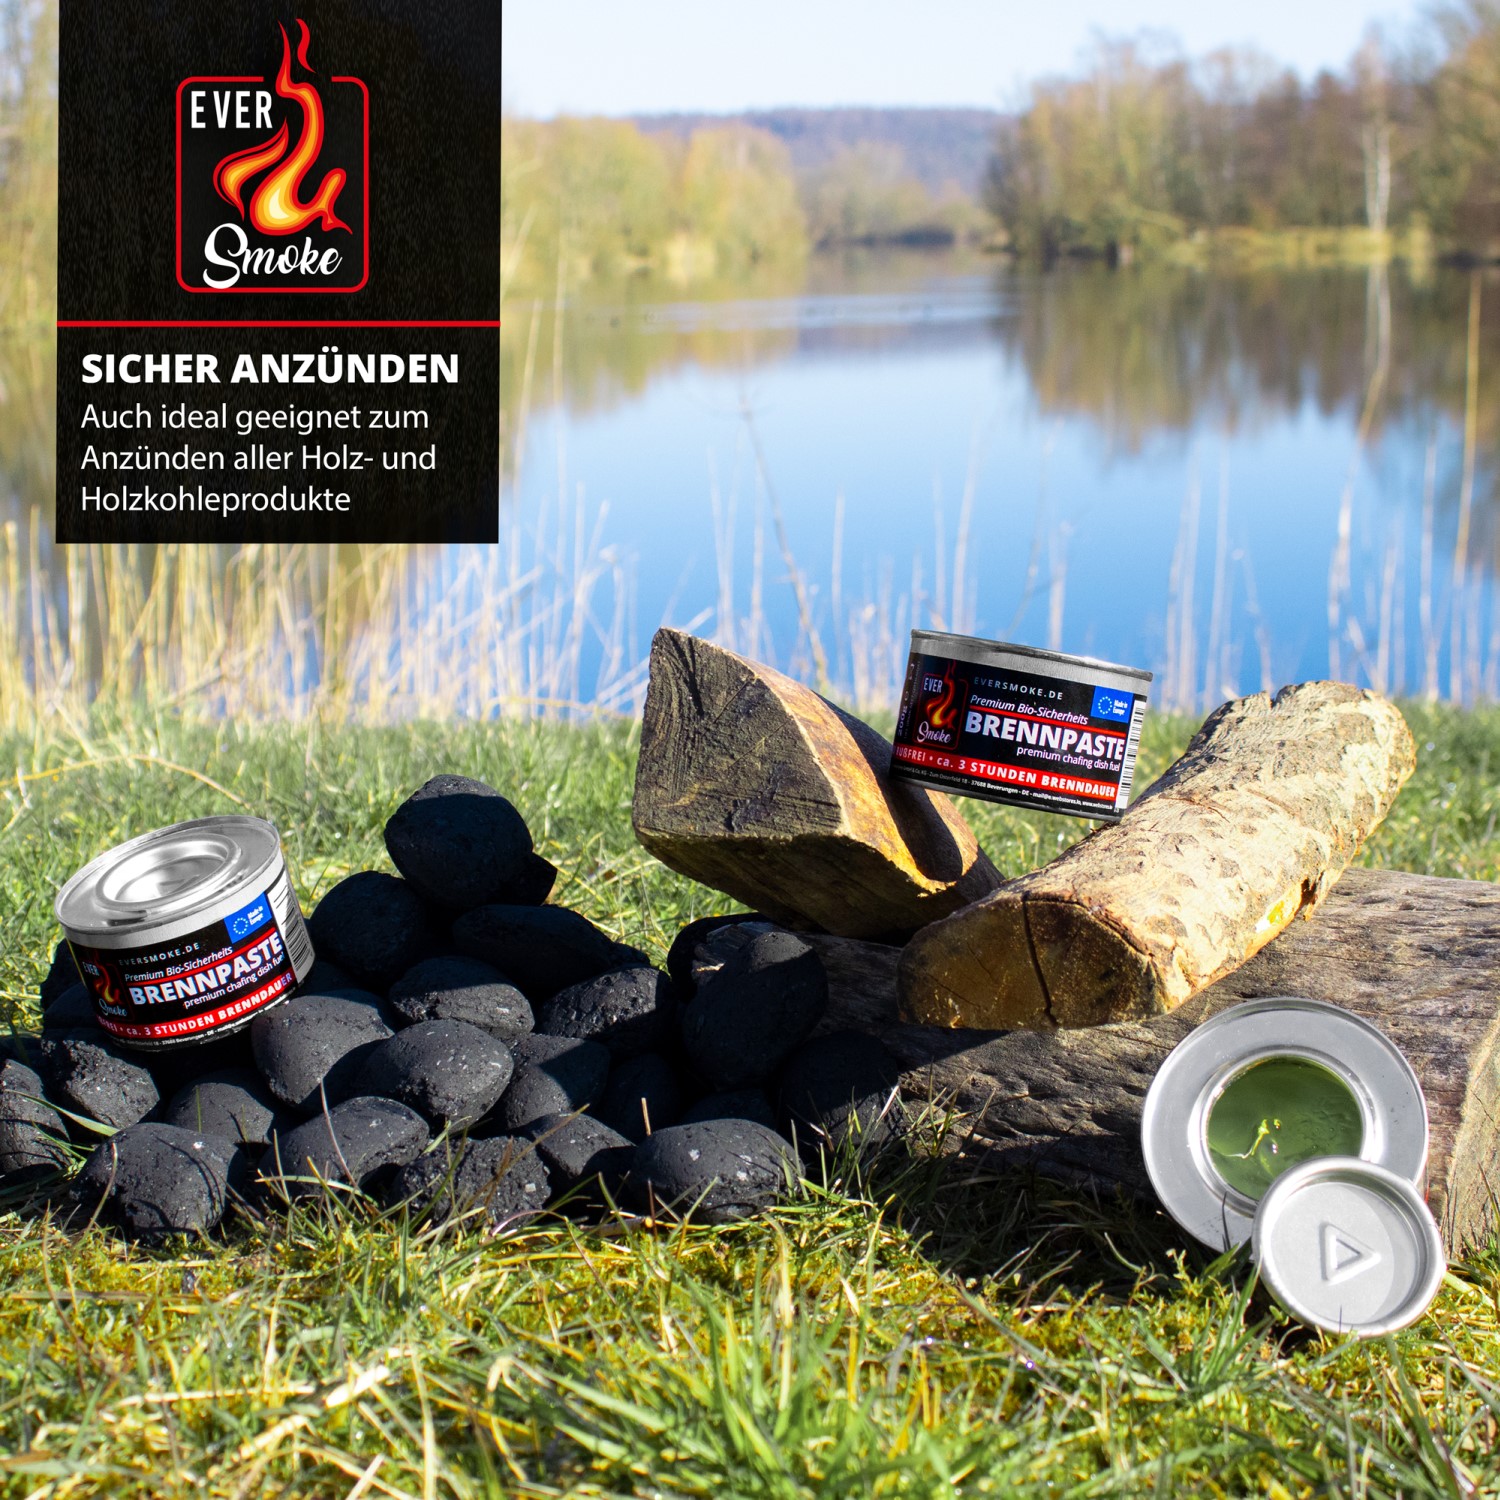 Pâte Combustible Gel de Chauffe Bio pour Chafing Dish- Chafing